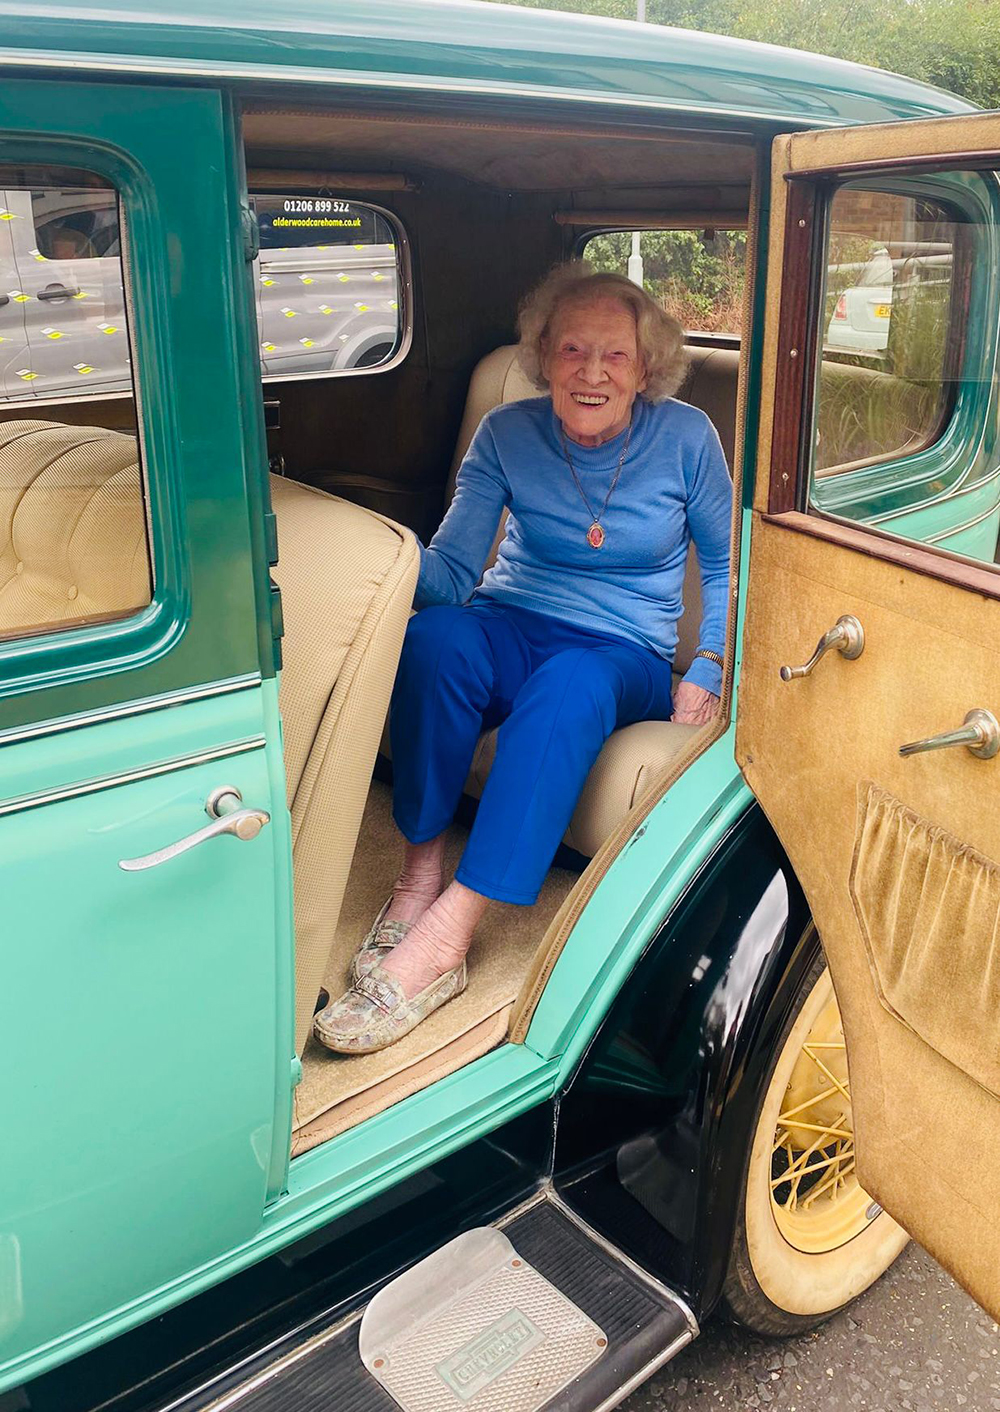 Care home resident sits in vintage car